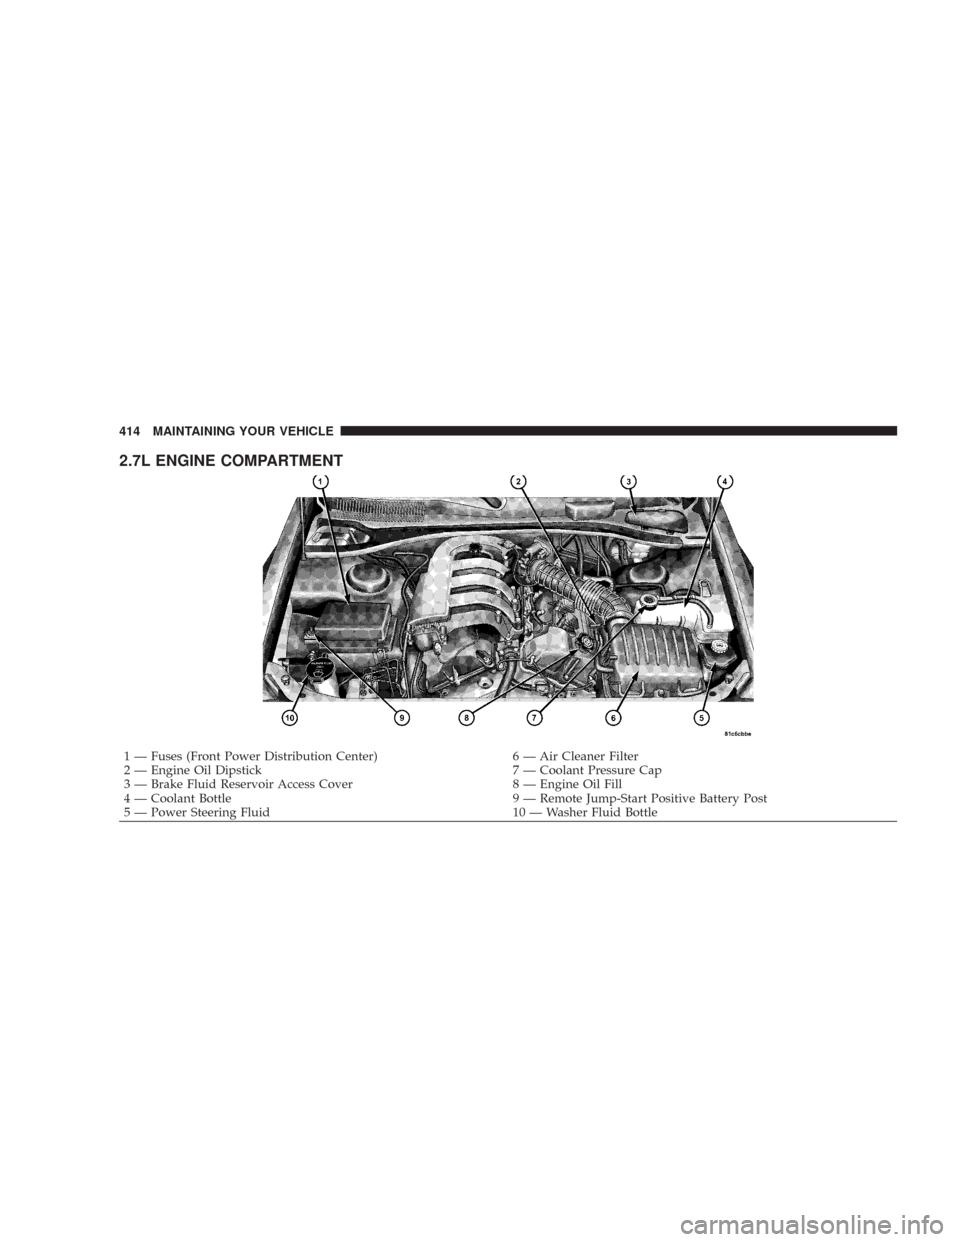 CHRYSLER 300 C 2008 1.G Owners Manual 2.7L ENGINE COMPARTMENT
1 — Fuses (Front Power Distribution Center) 6 — Air Cleaner Filter
2 — Engine Oil Dipstick 7 — Coolant Pressure Cap
3 — Brake Fluid Reservoir Access Cover 8 — Engin